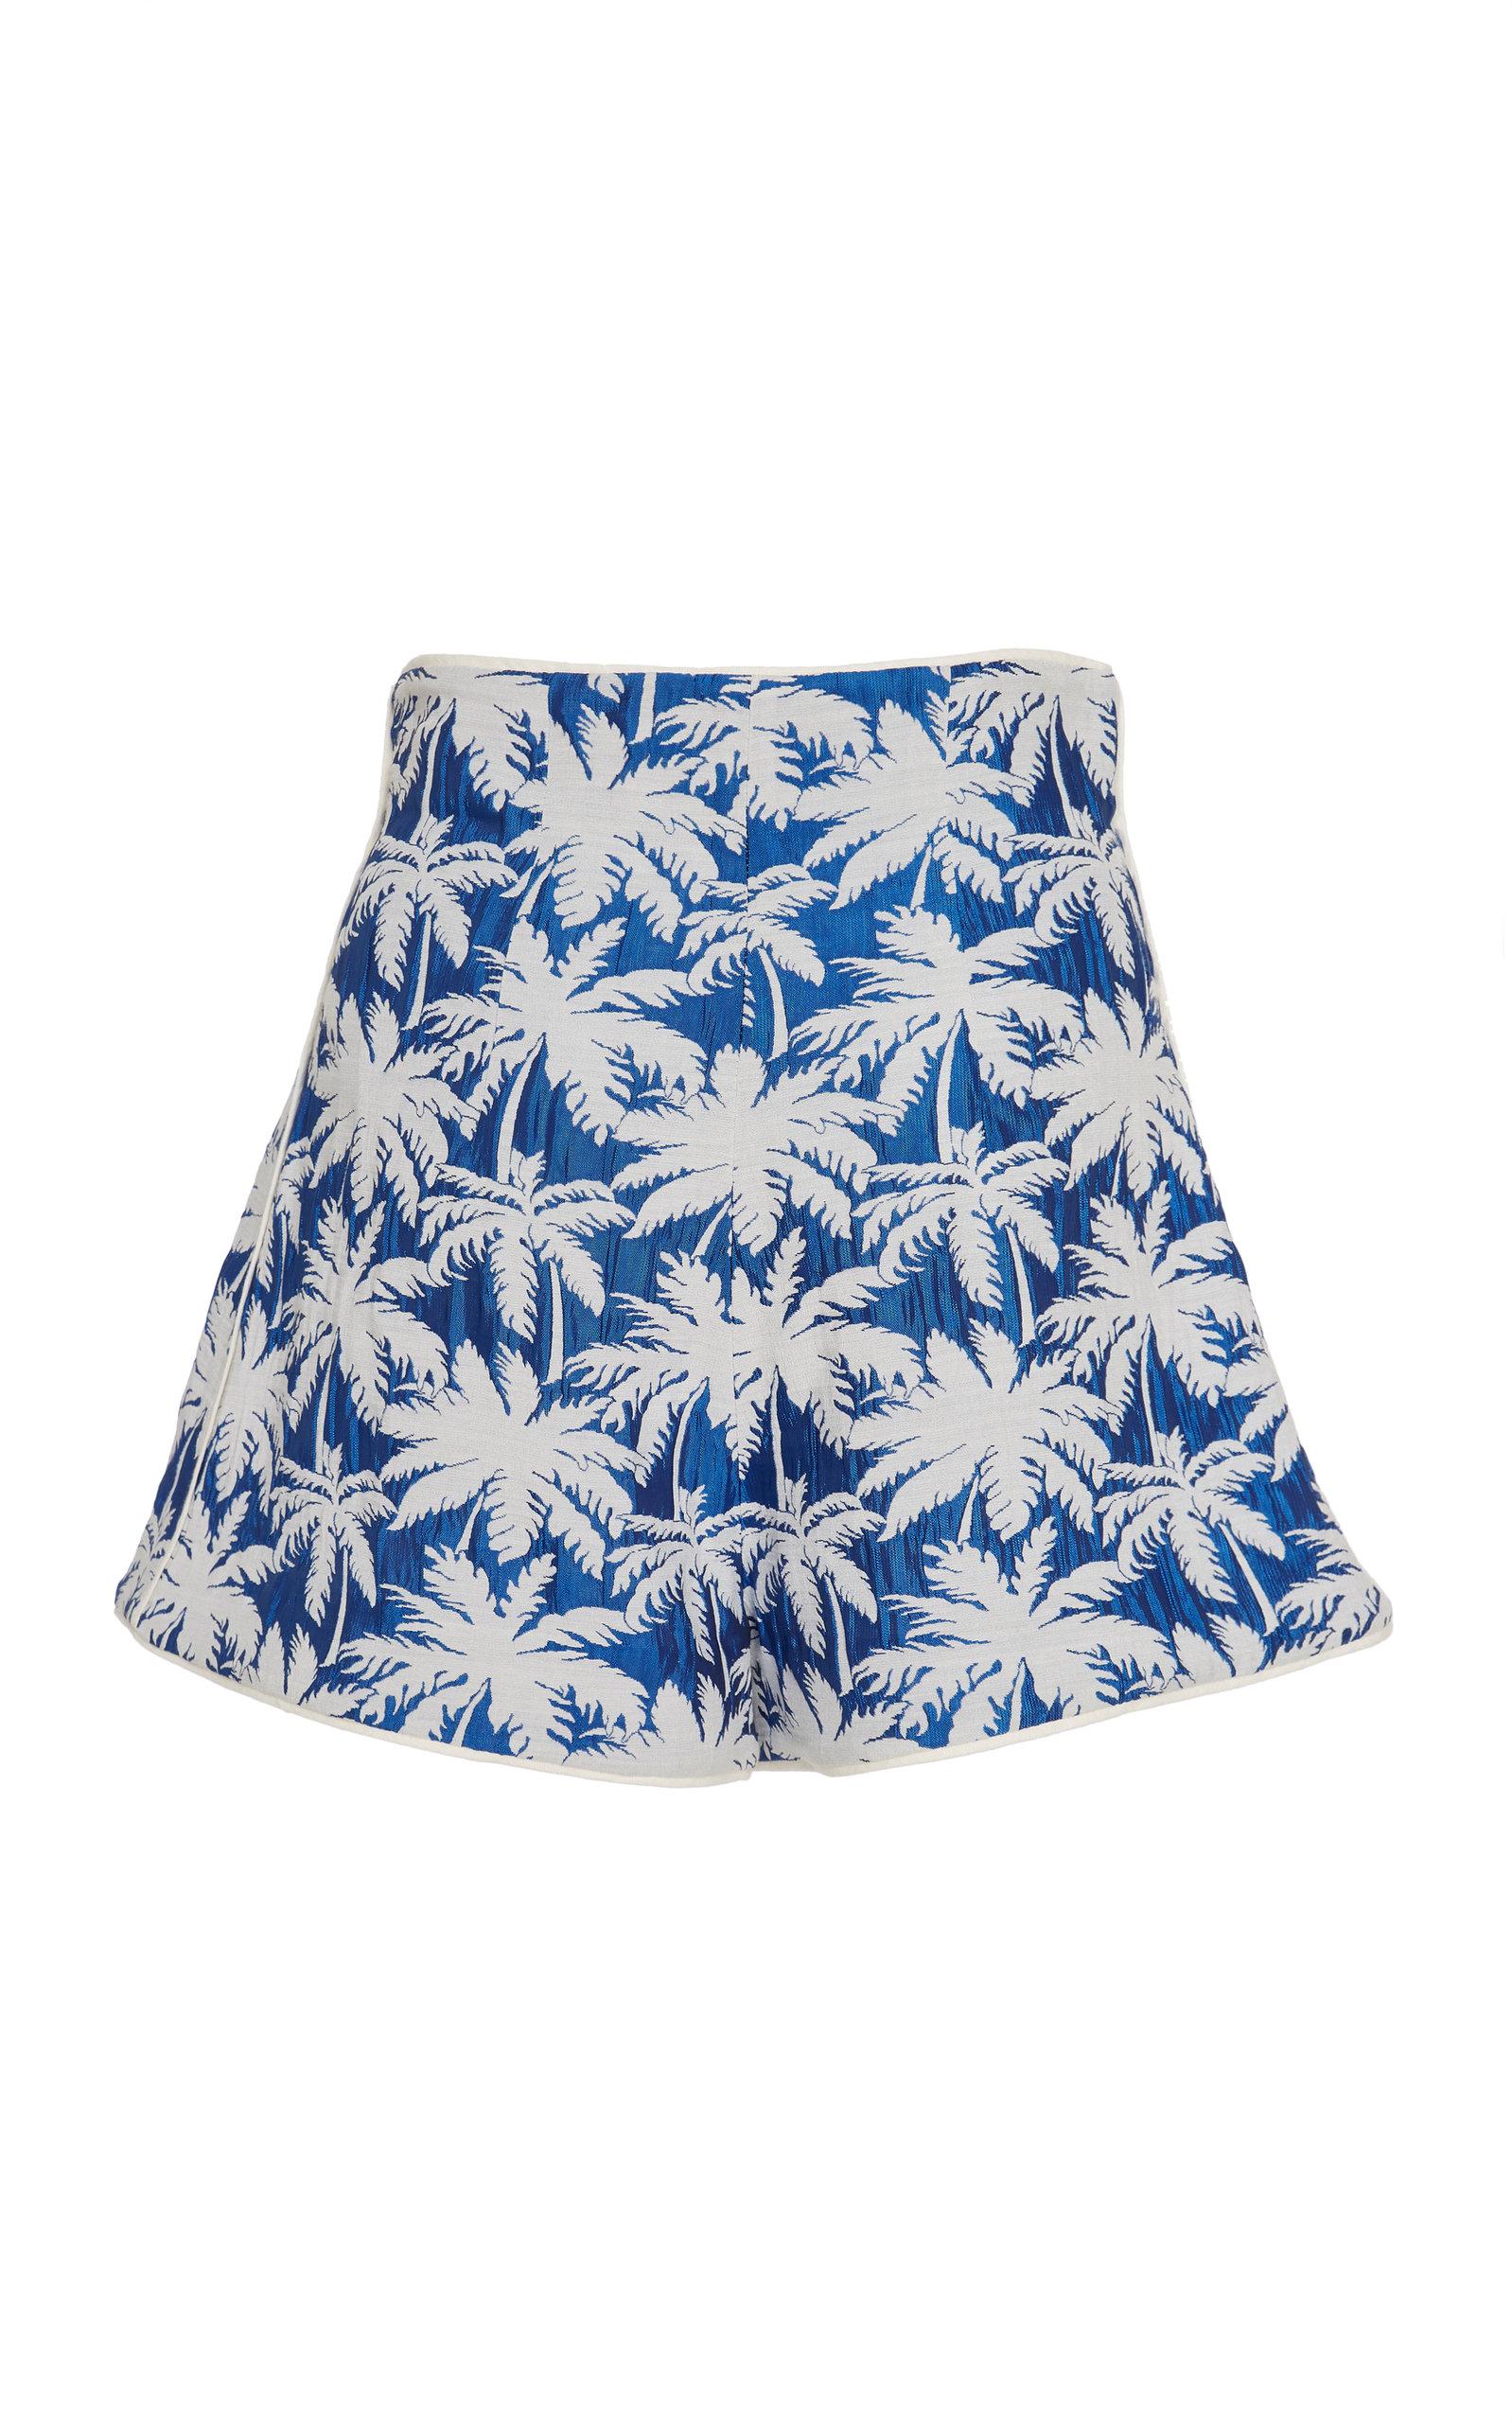 Alexis Synthetic Carla Printed Jacquard Mini Shorts in Blue - Lyst